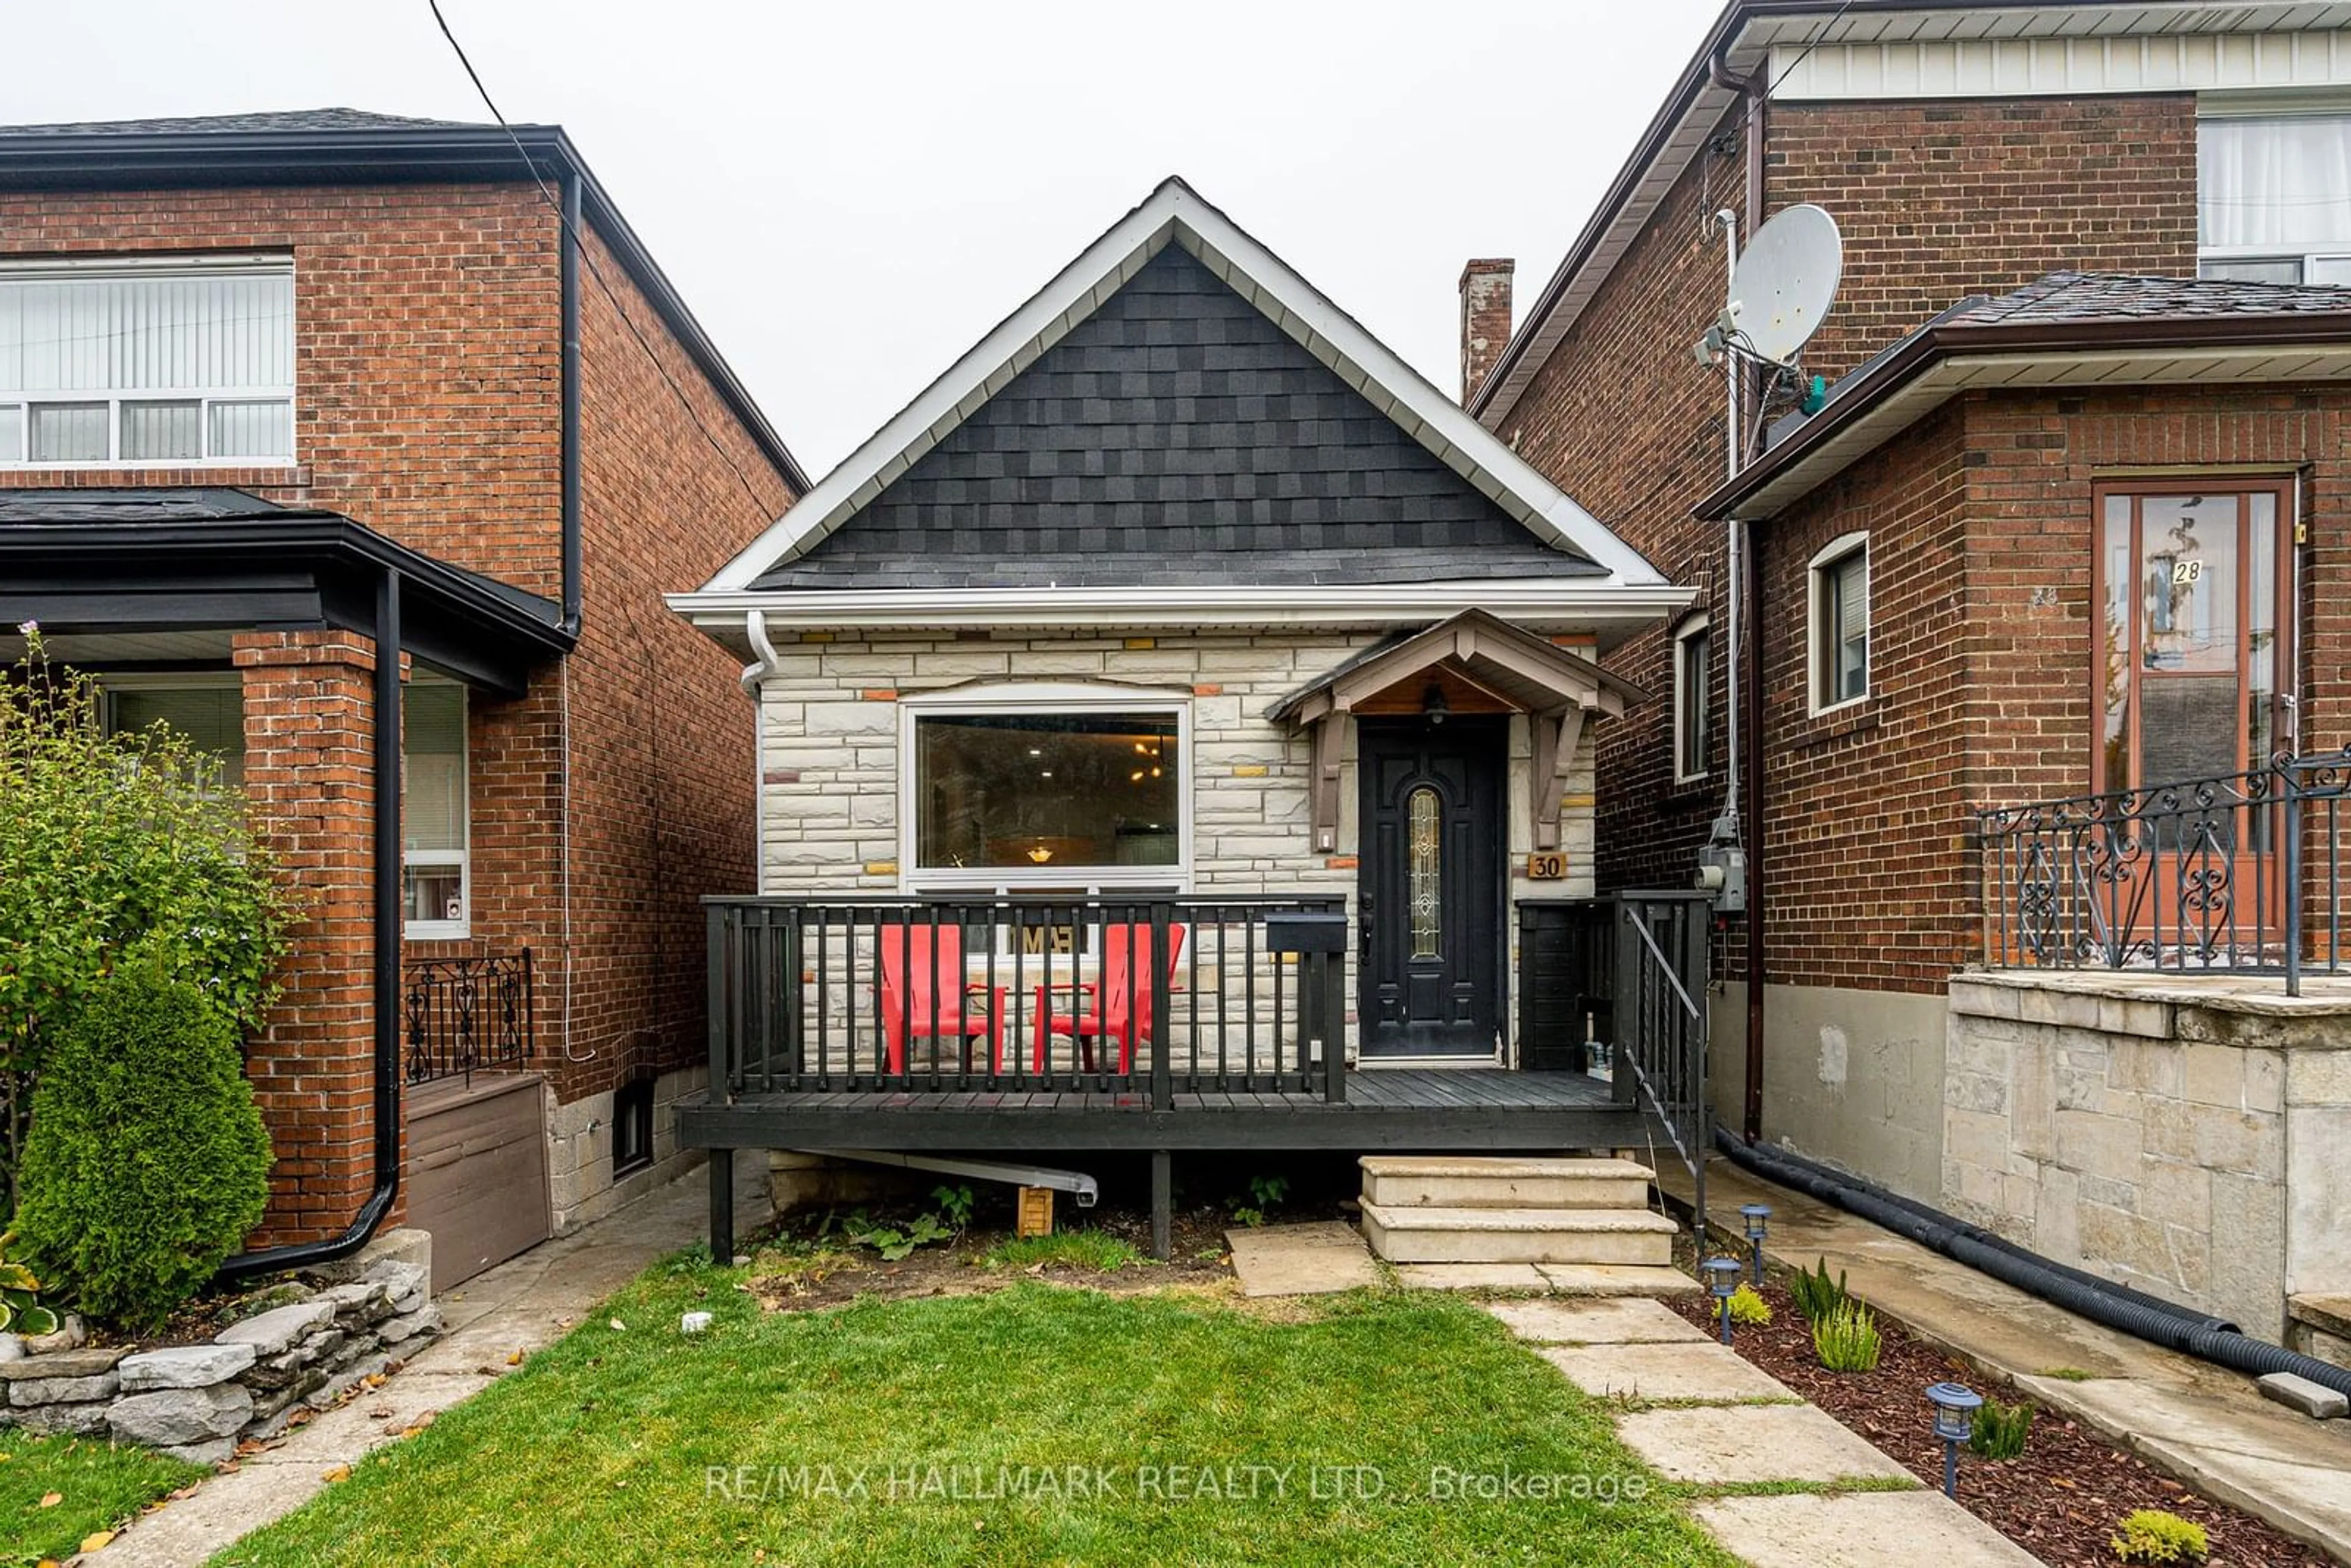 Home with brick exterior material for 30 Northland Ave, Toronto Ontario M6N 2C6